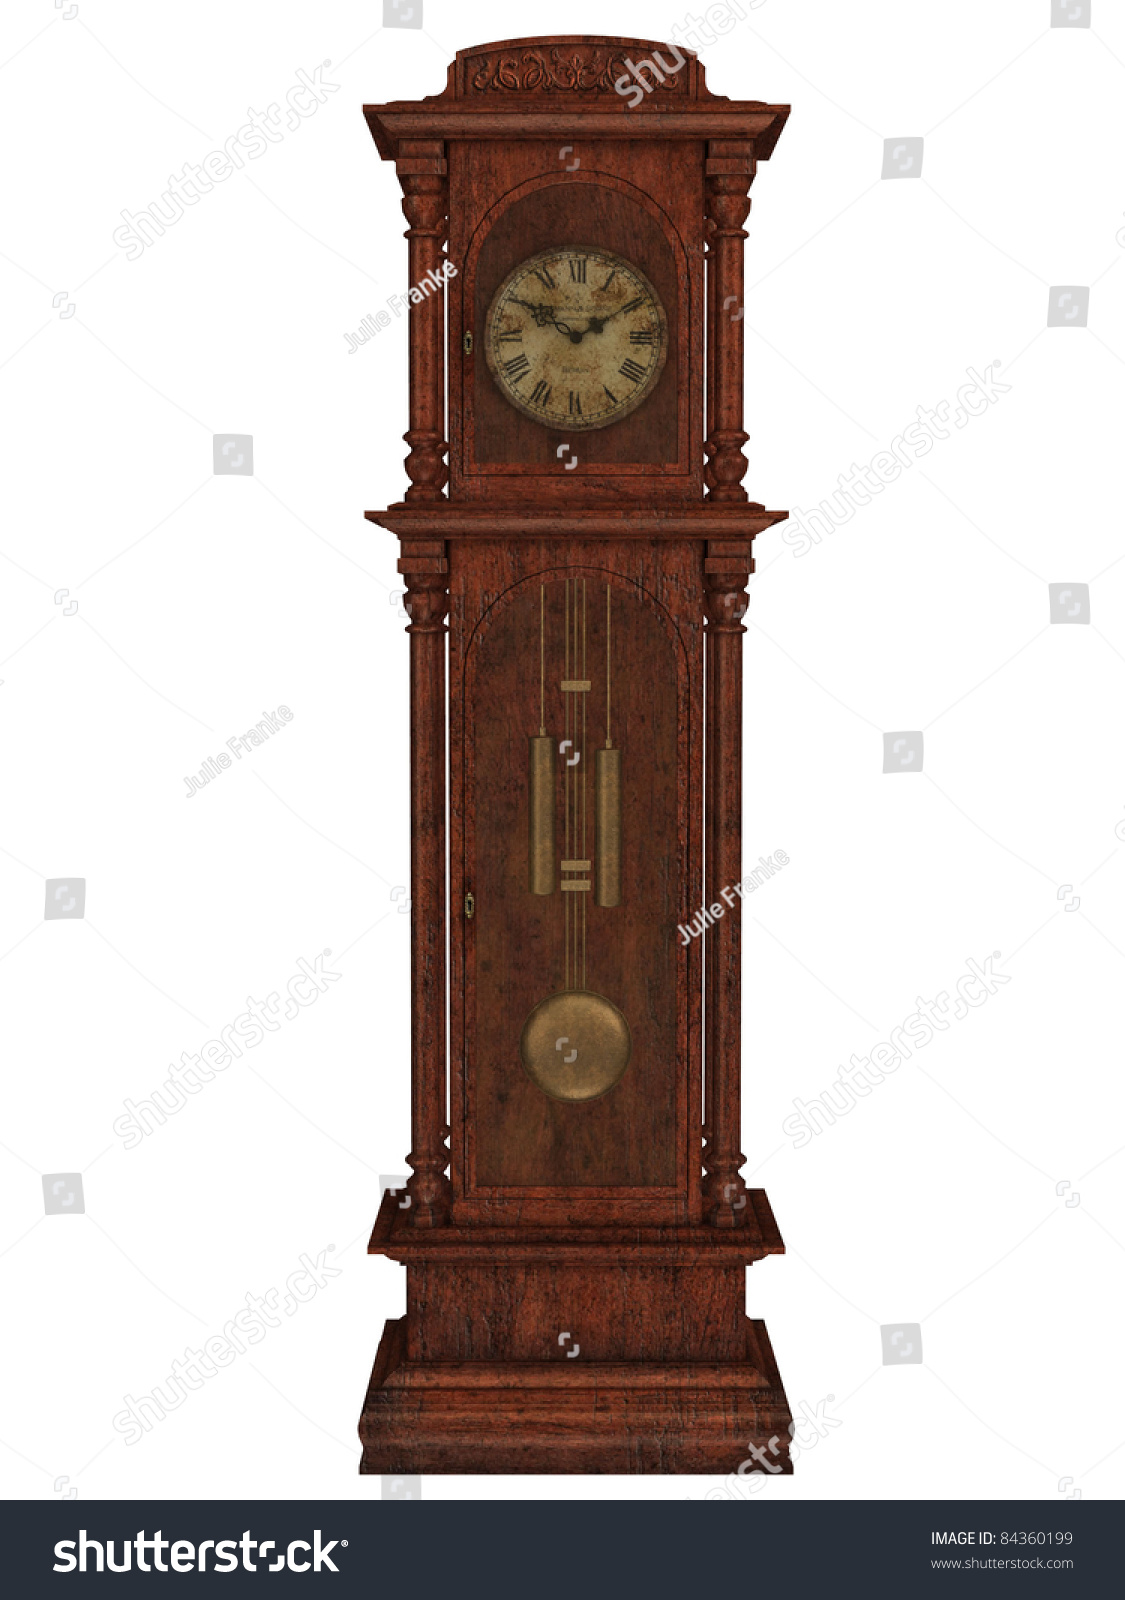 Old Grandfather Clock Stock Photo 84360199 : Shutterstock
